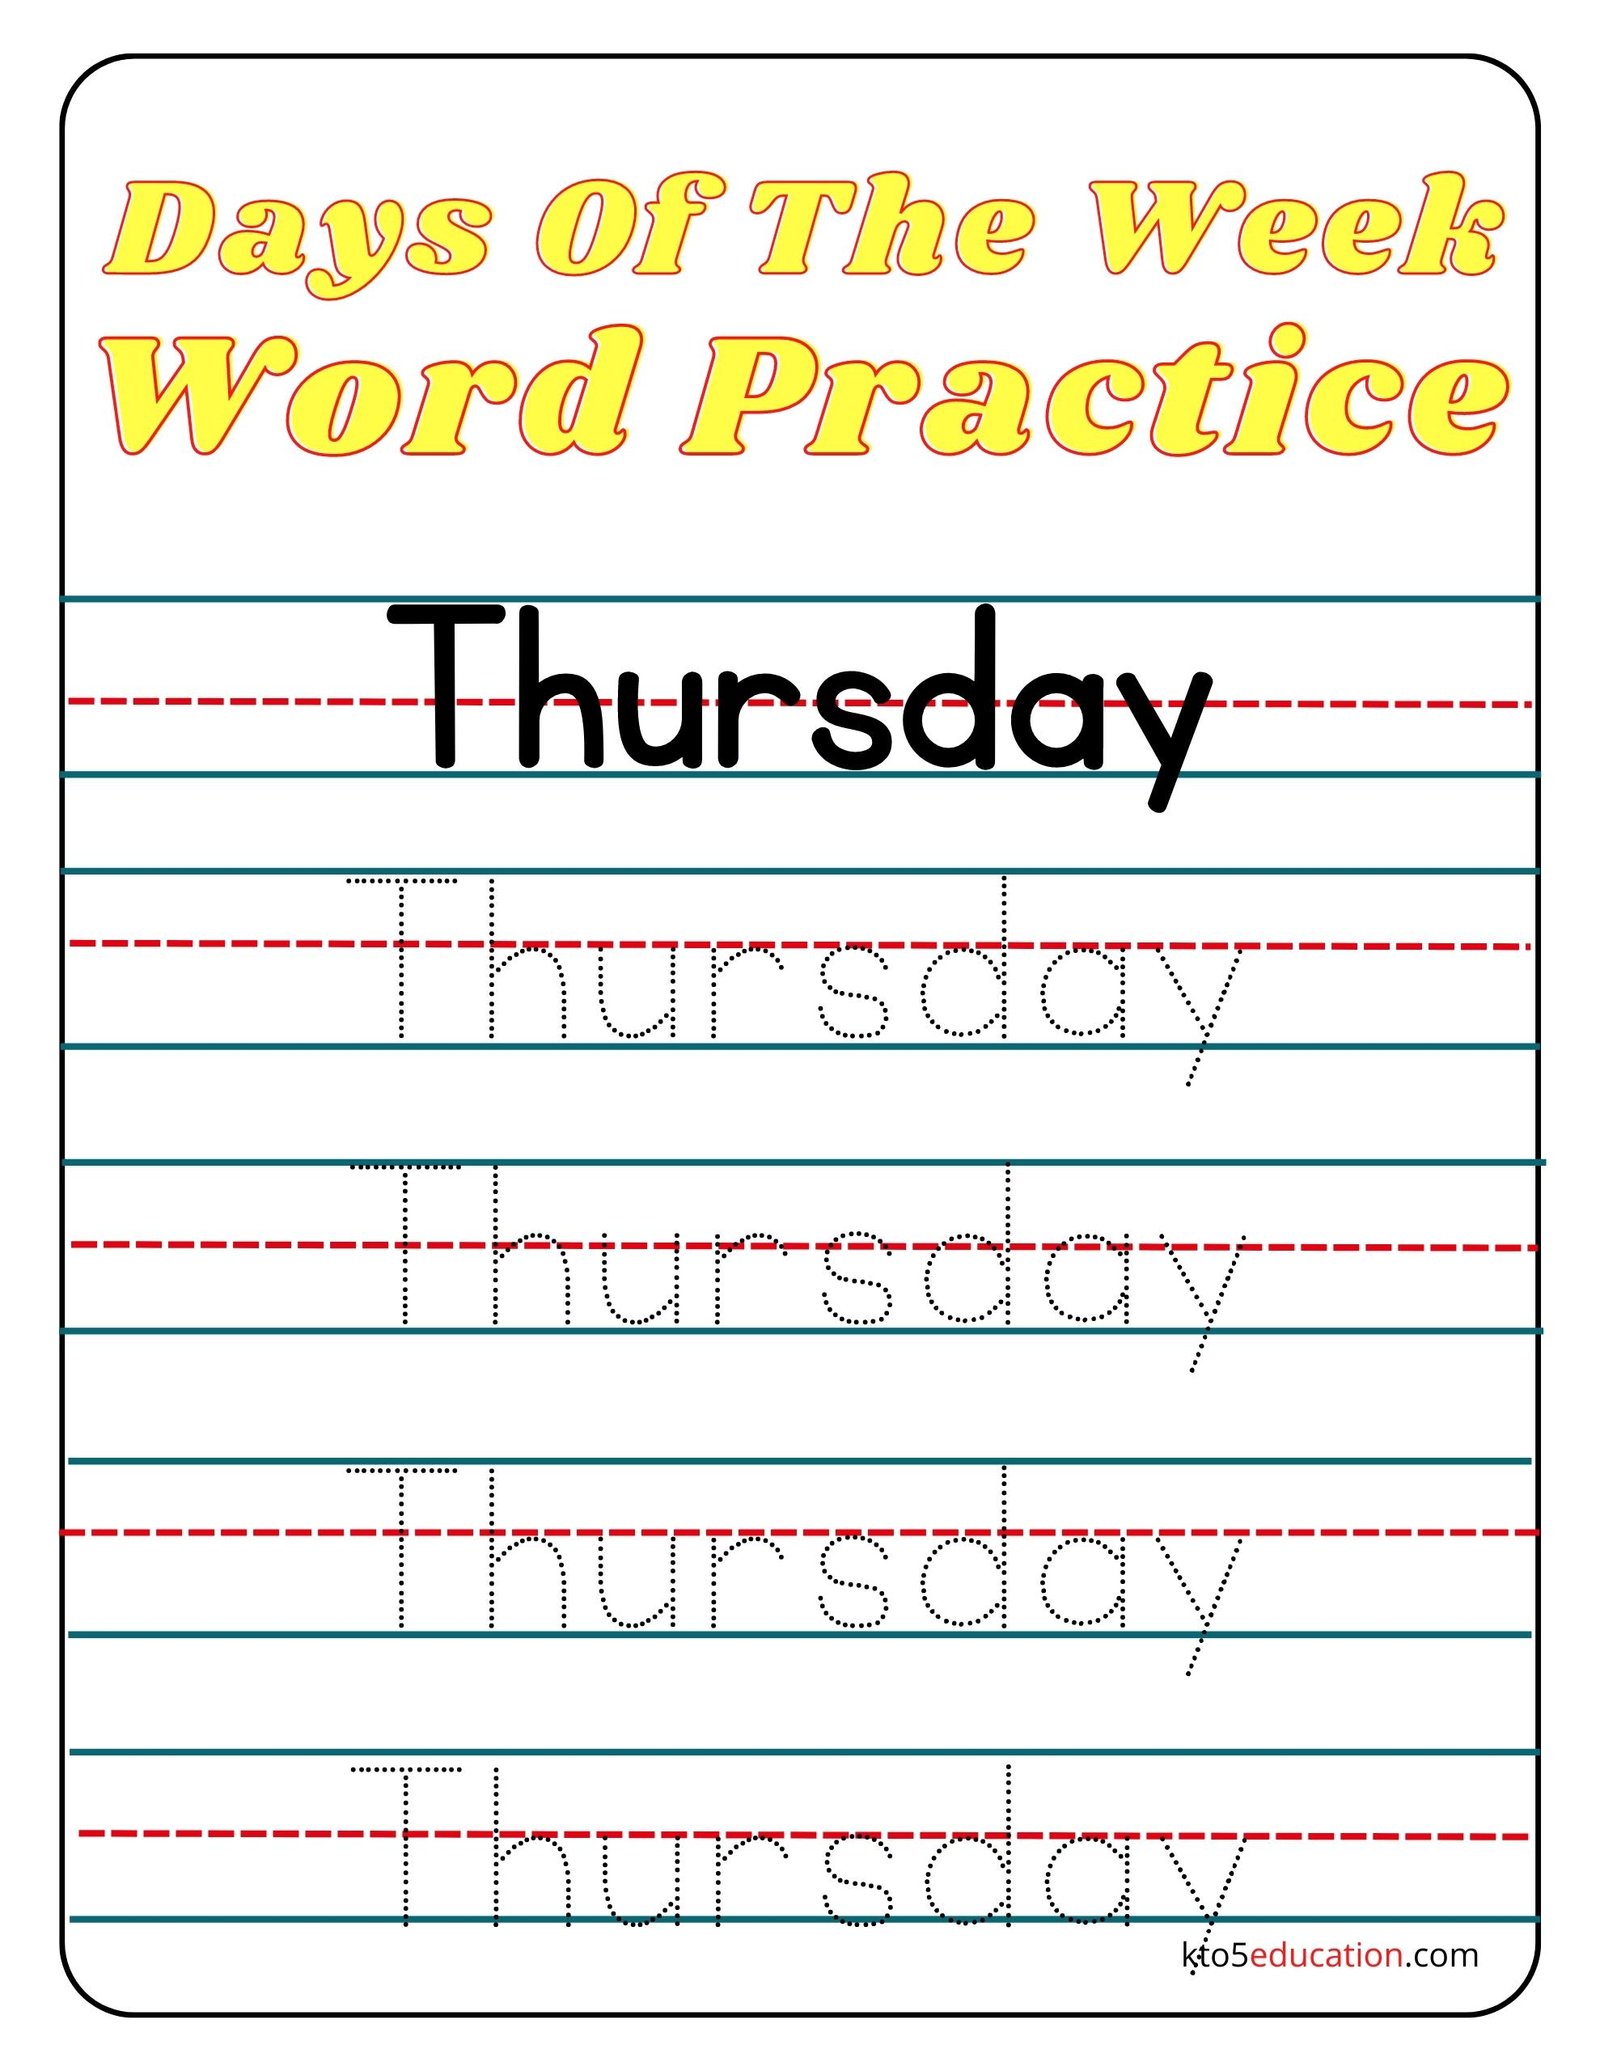 Days Of The Week Thursday Word Practice Worksheet